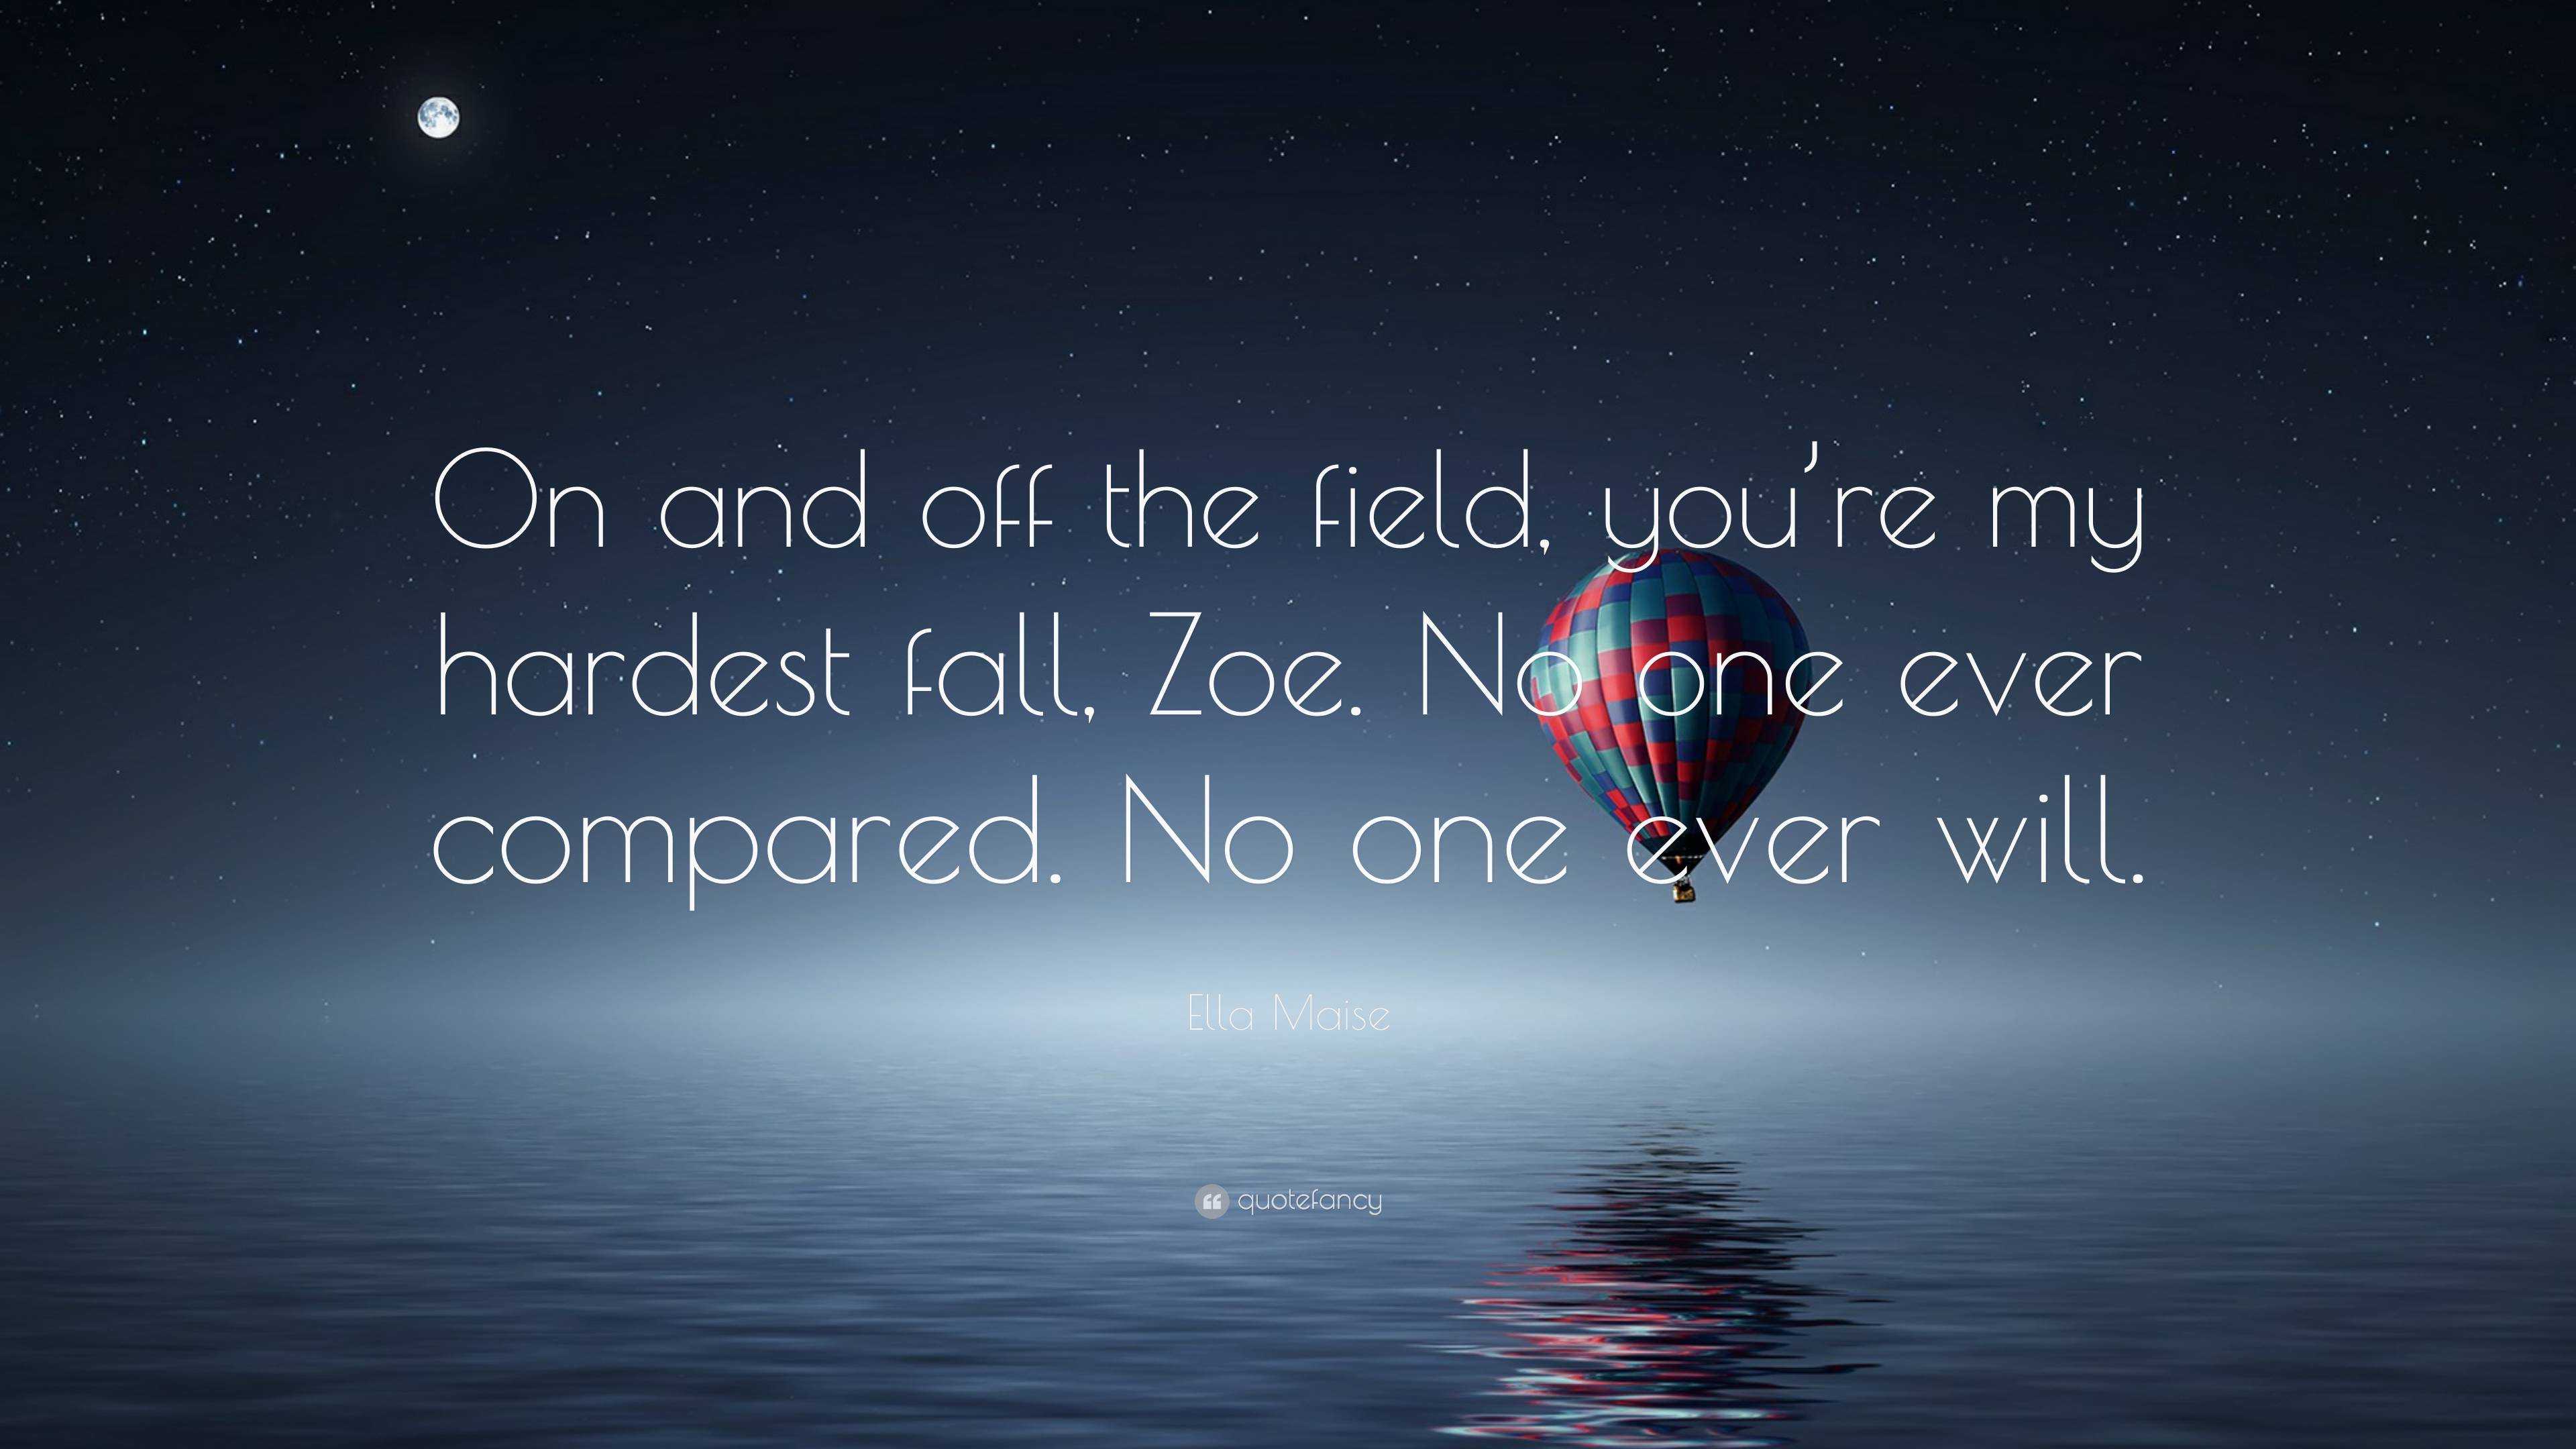 6480305 Ella Maise Quote On And Off The Field You Re My Hardest Fall Zoe 